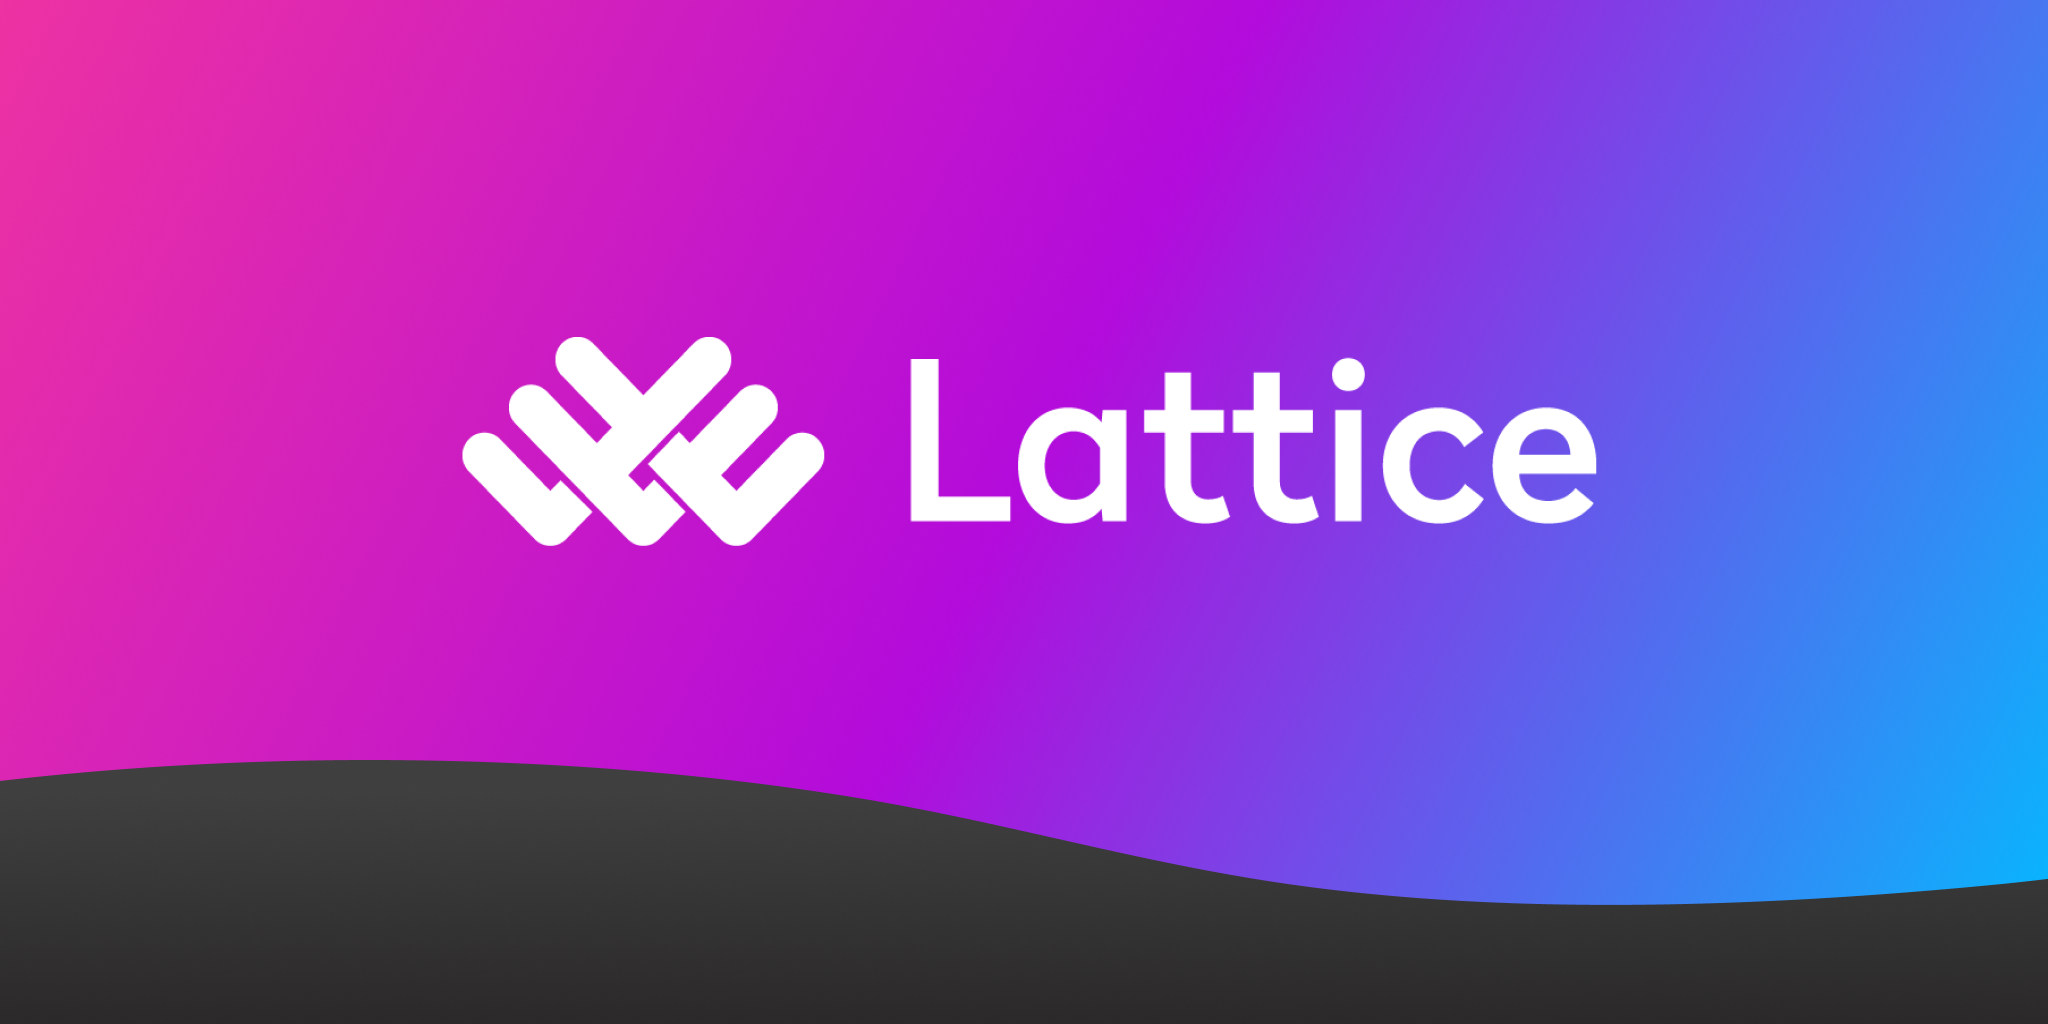 Gradient background from vibrant pink to vibrant blue with "wave" of black below it, with white Lattice logo on top